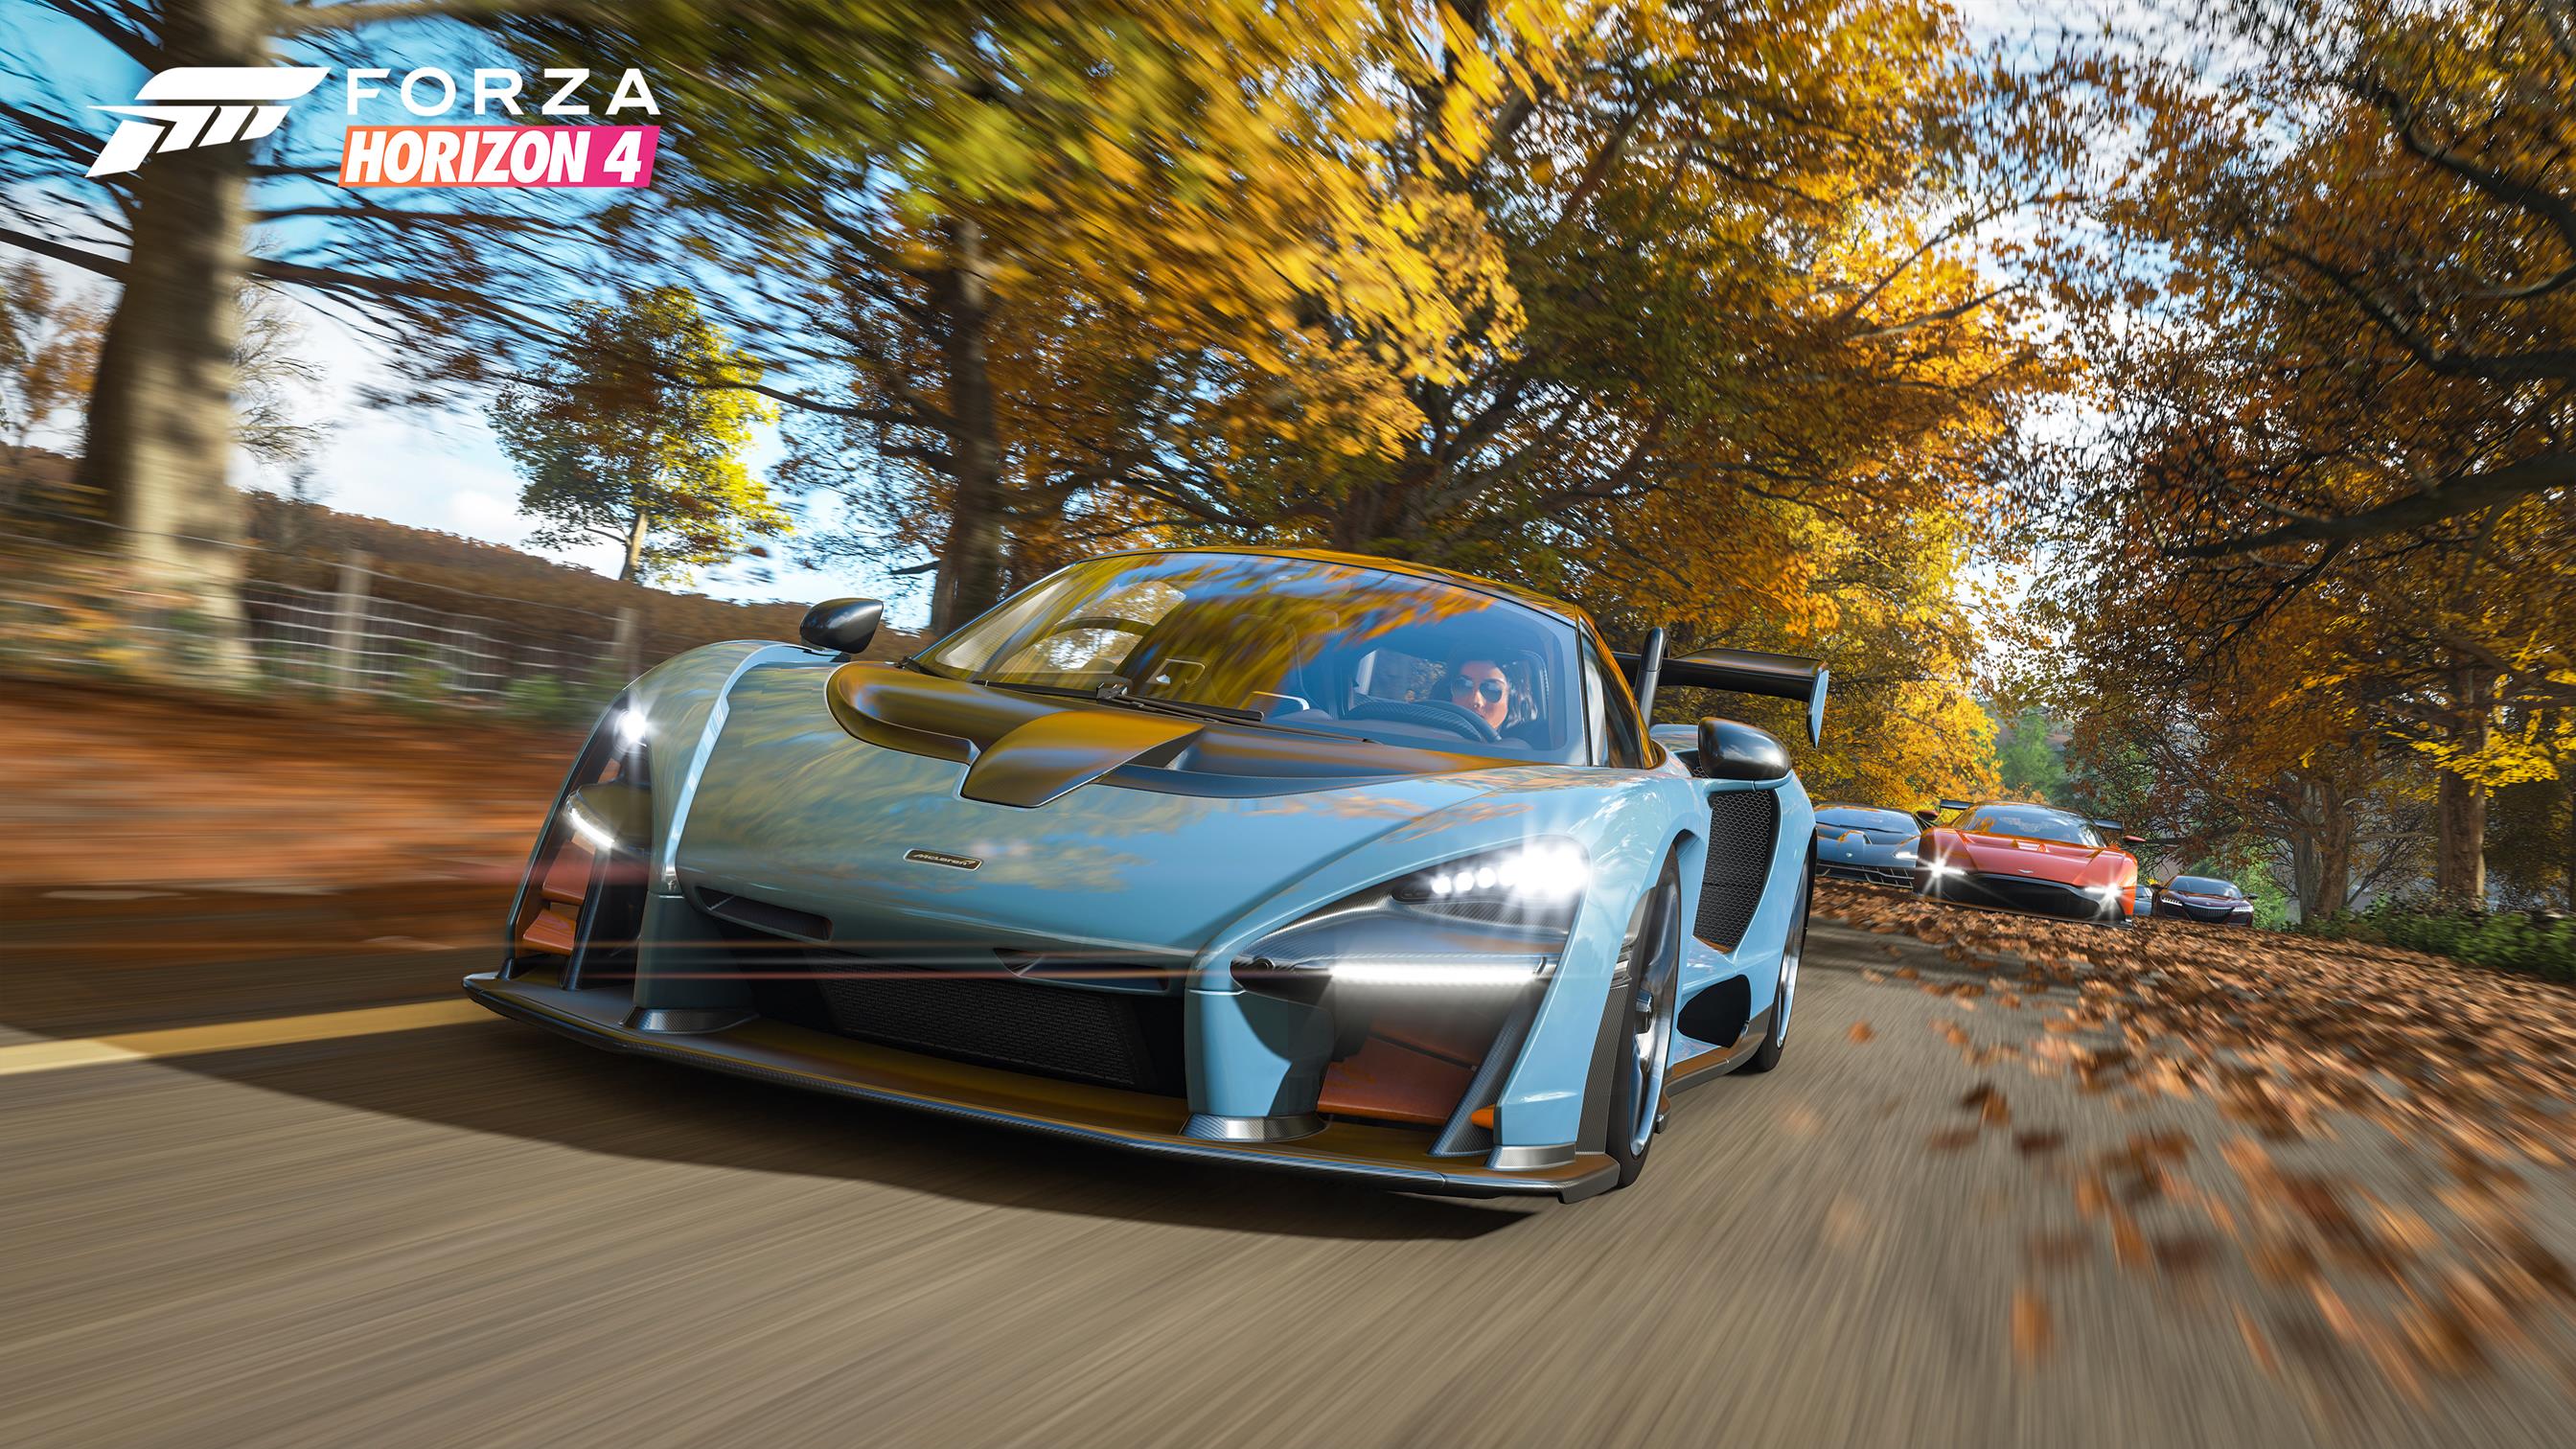 Image for Forza Horizon 4 is getting a route creator, new Horizon Story in this week's patch